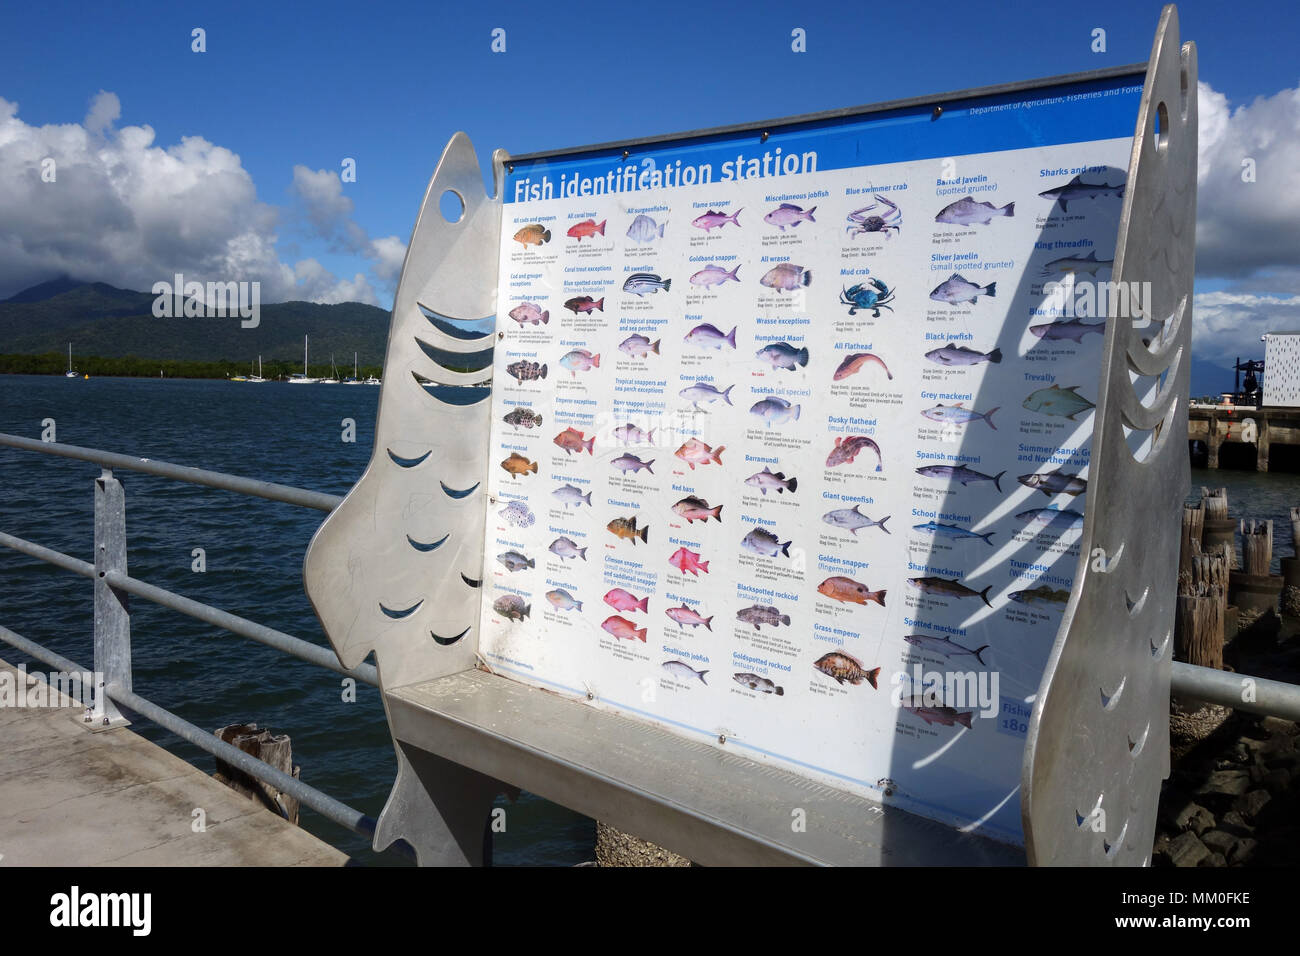 Fish identification station provided by government fisheries agency, Cairns, Queensland, Australia. No PR Stock Photo